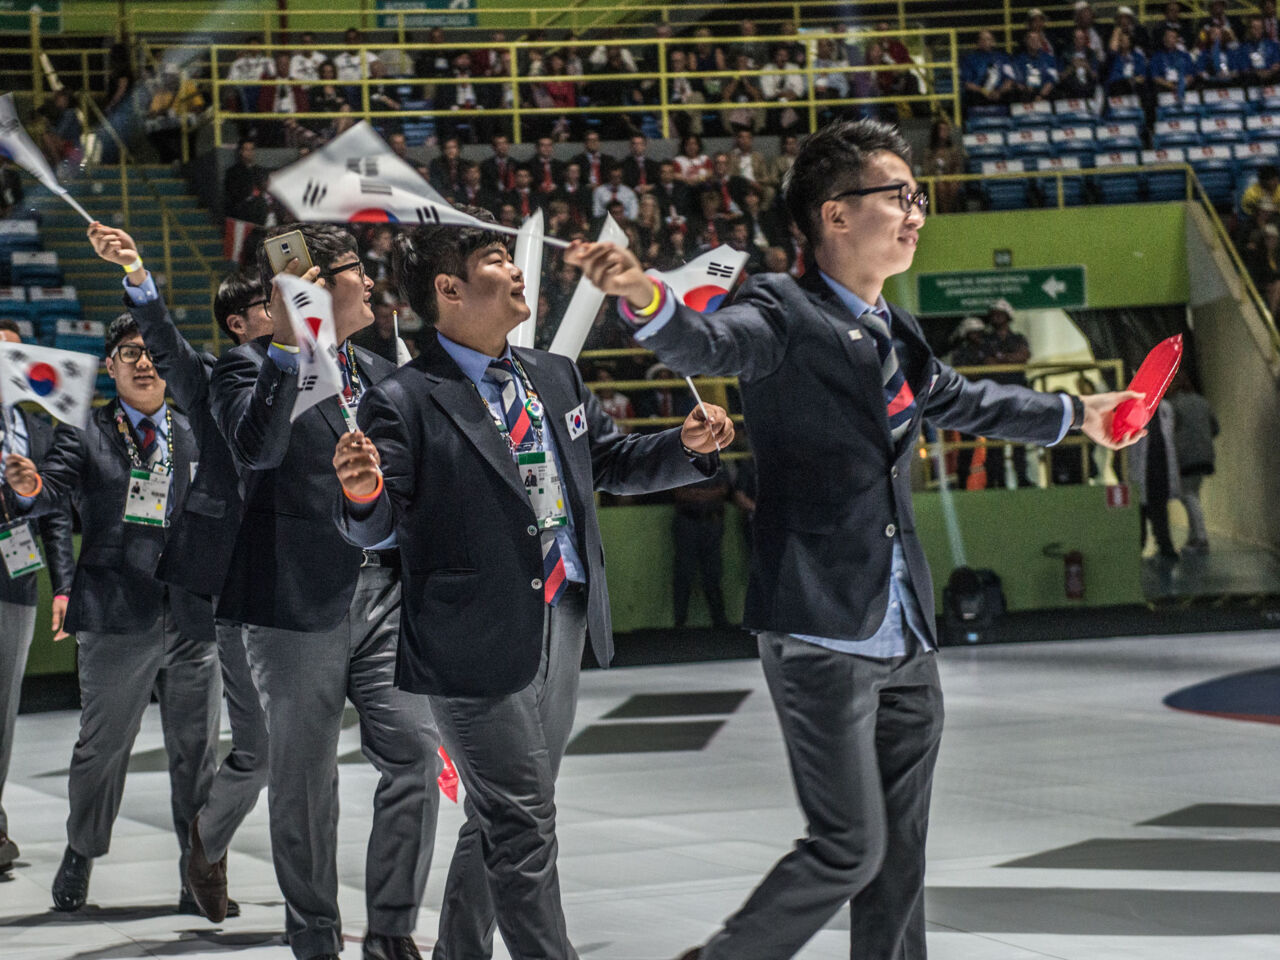 Lee Hee Dong took part in the Opening Ceremony at WorldSkills São Paulo 2015.
